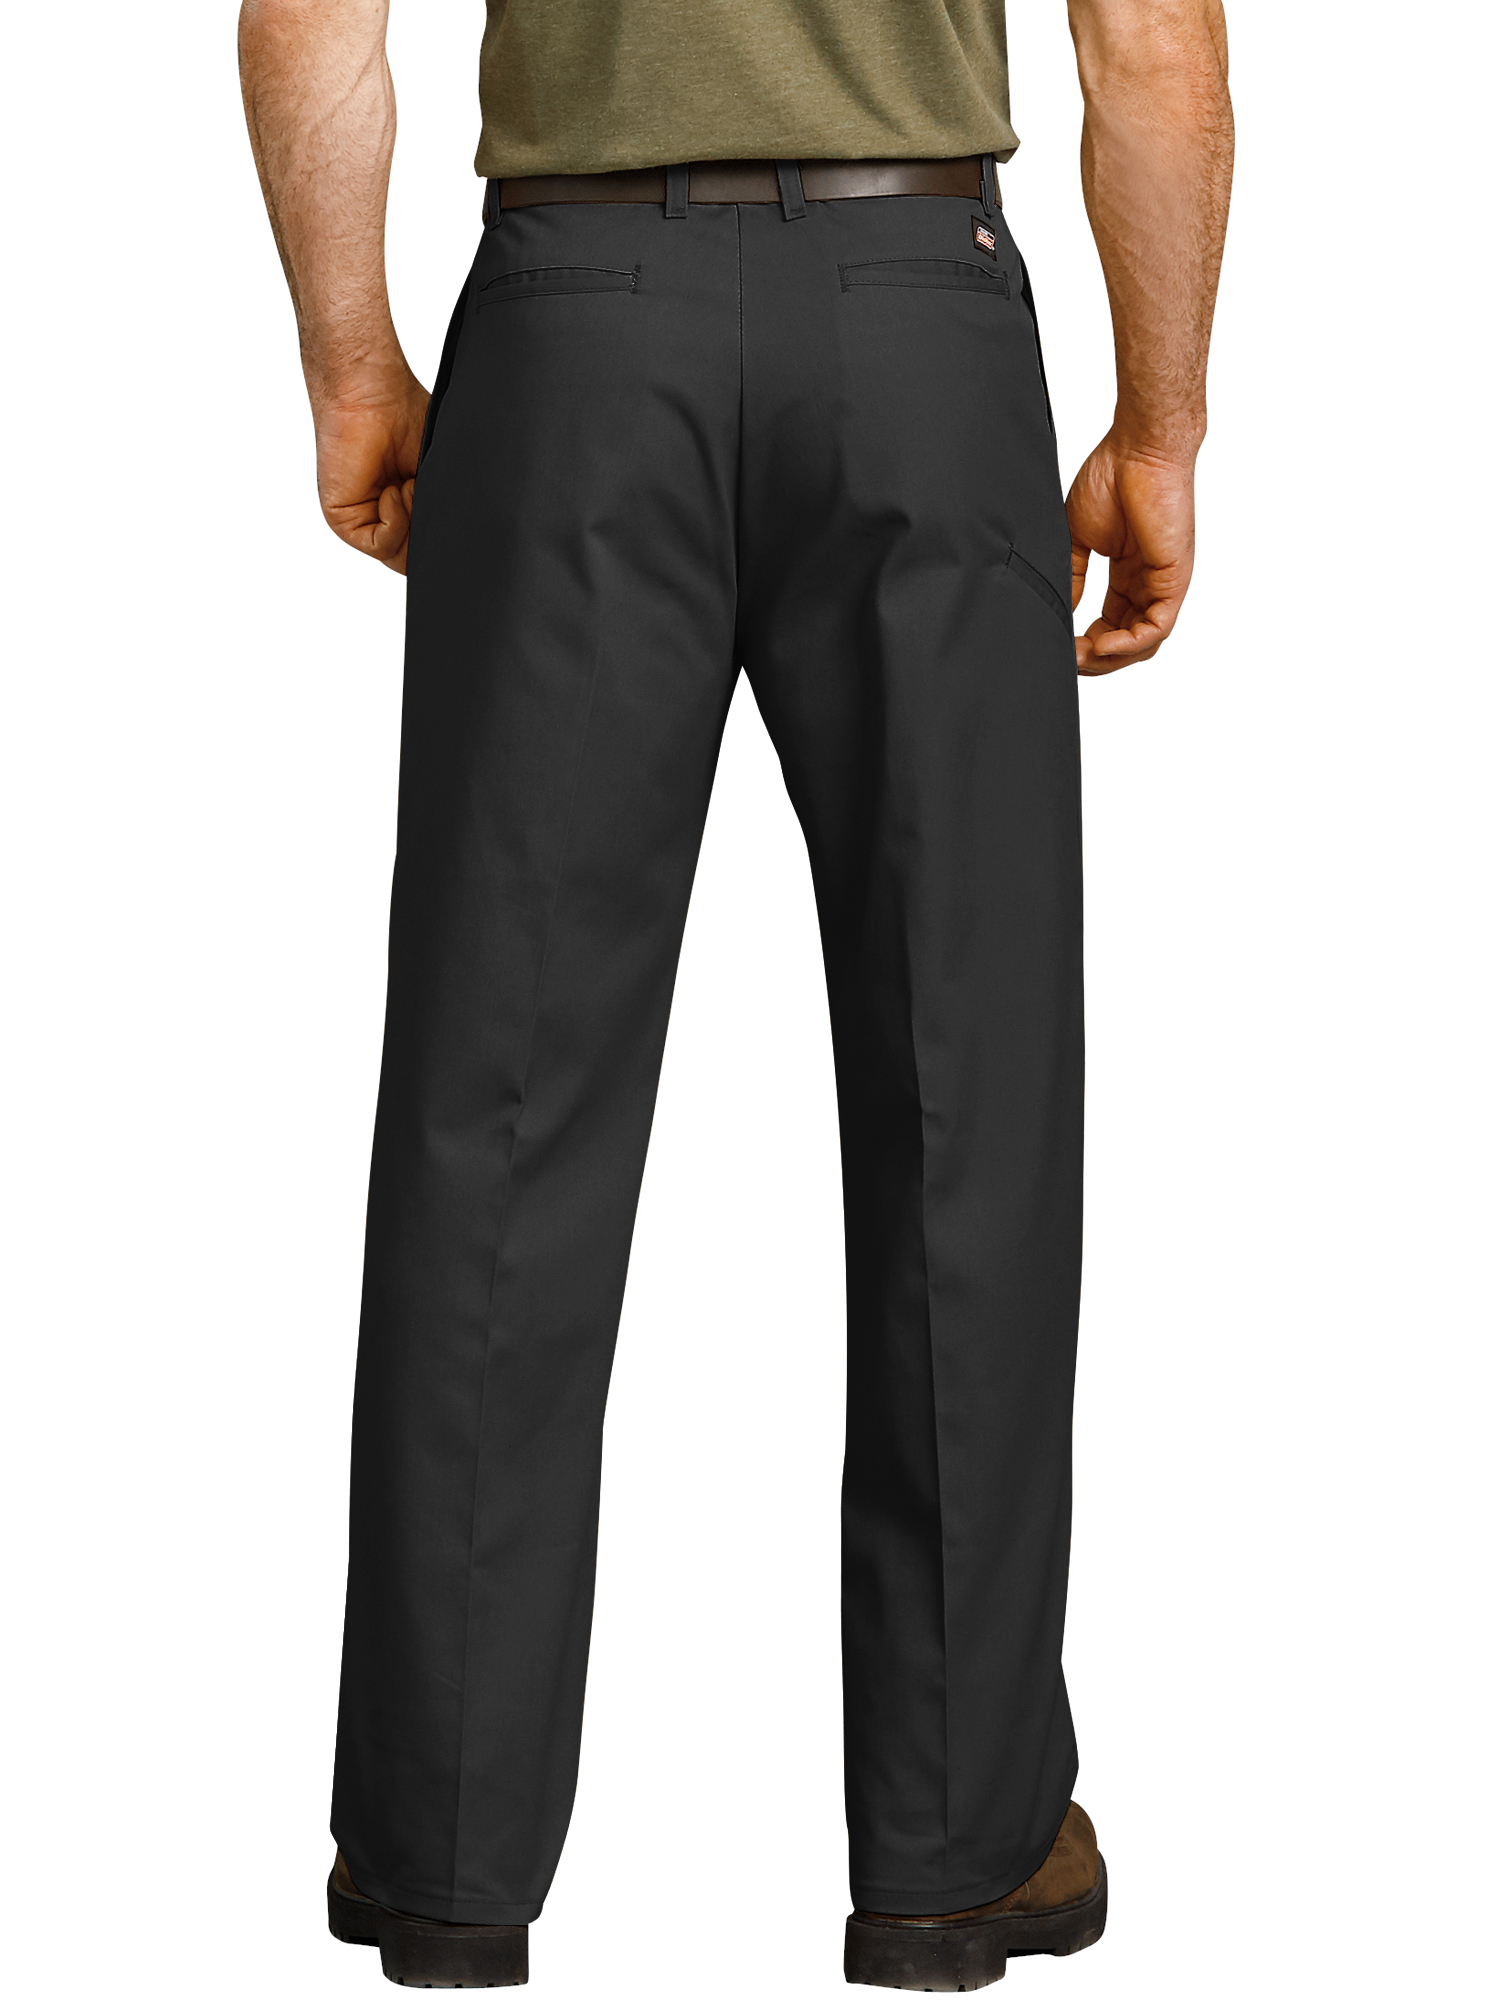 Genuine Dickies Mens Relaxed Fit Straight Leg Flat Front Flex Pant - image 2 of 2